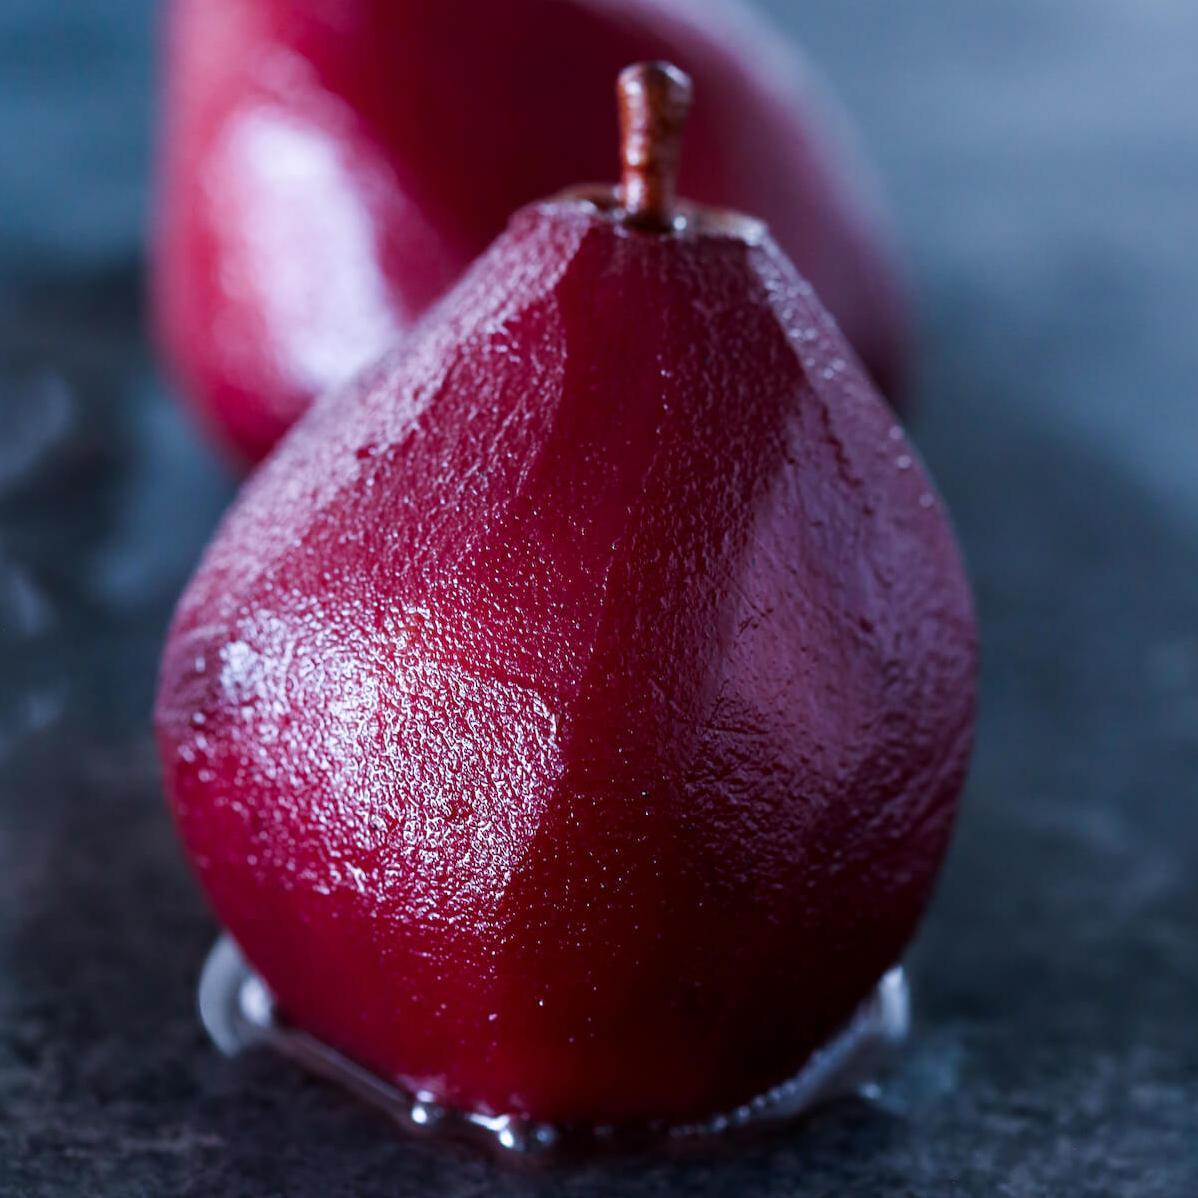  Comice Pears in spicy red wine make a perfect dessert.